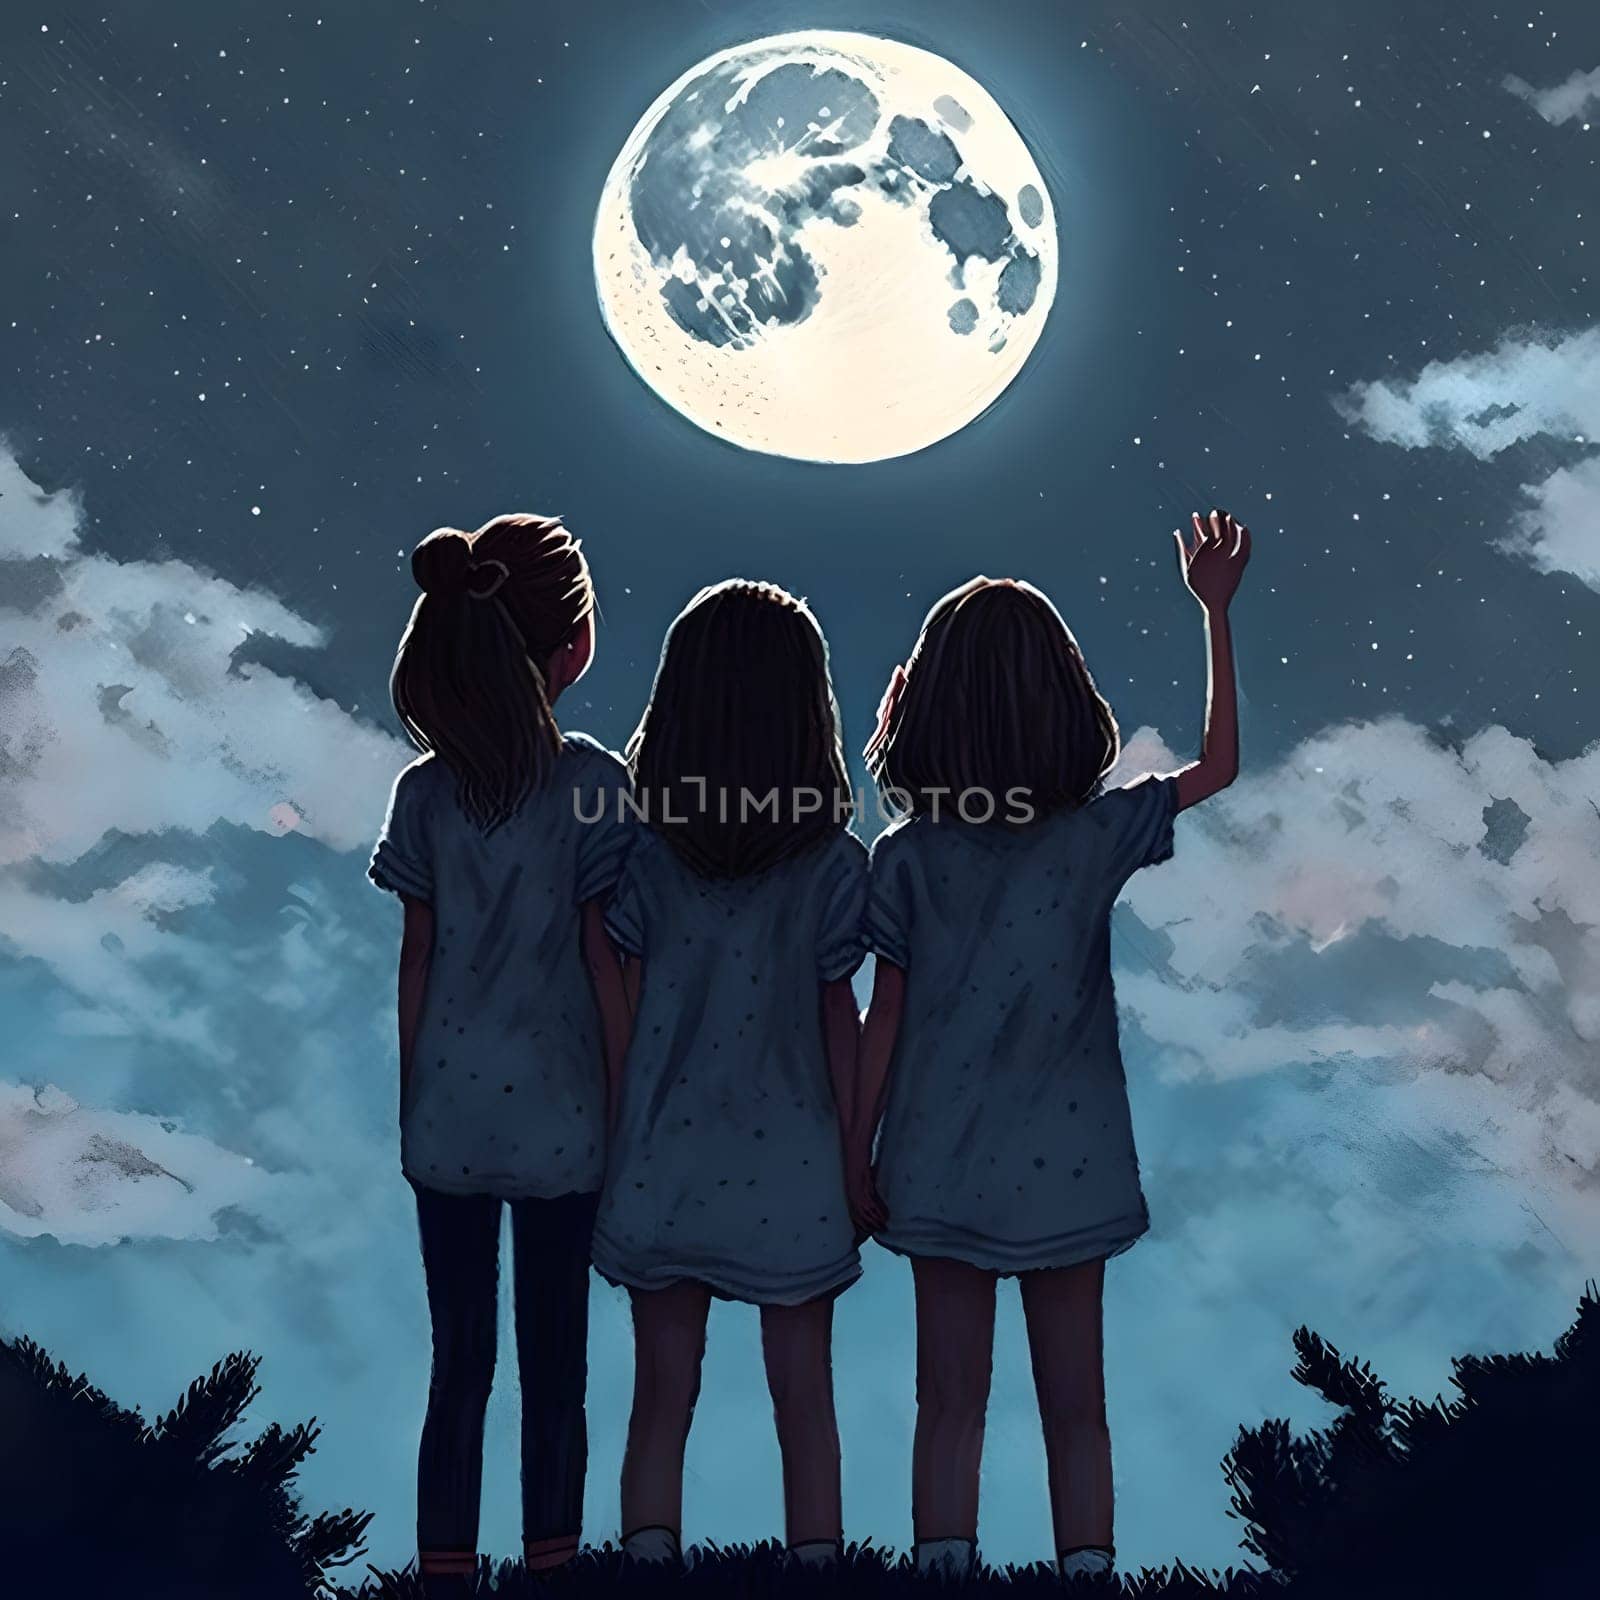 three young girls looking up at the Moon in night sky, neural network generated art by z1b